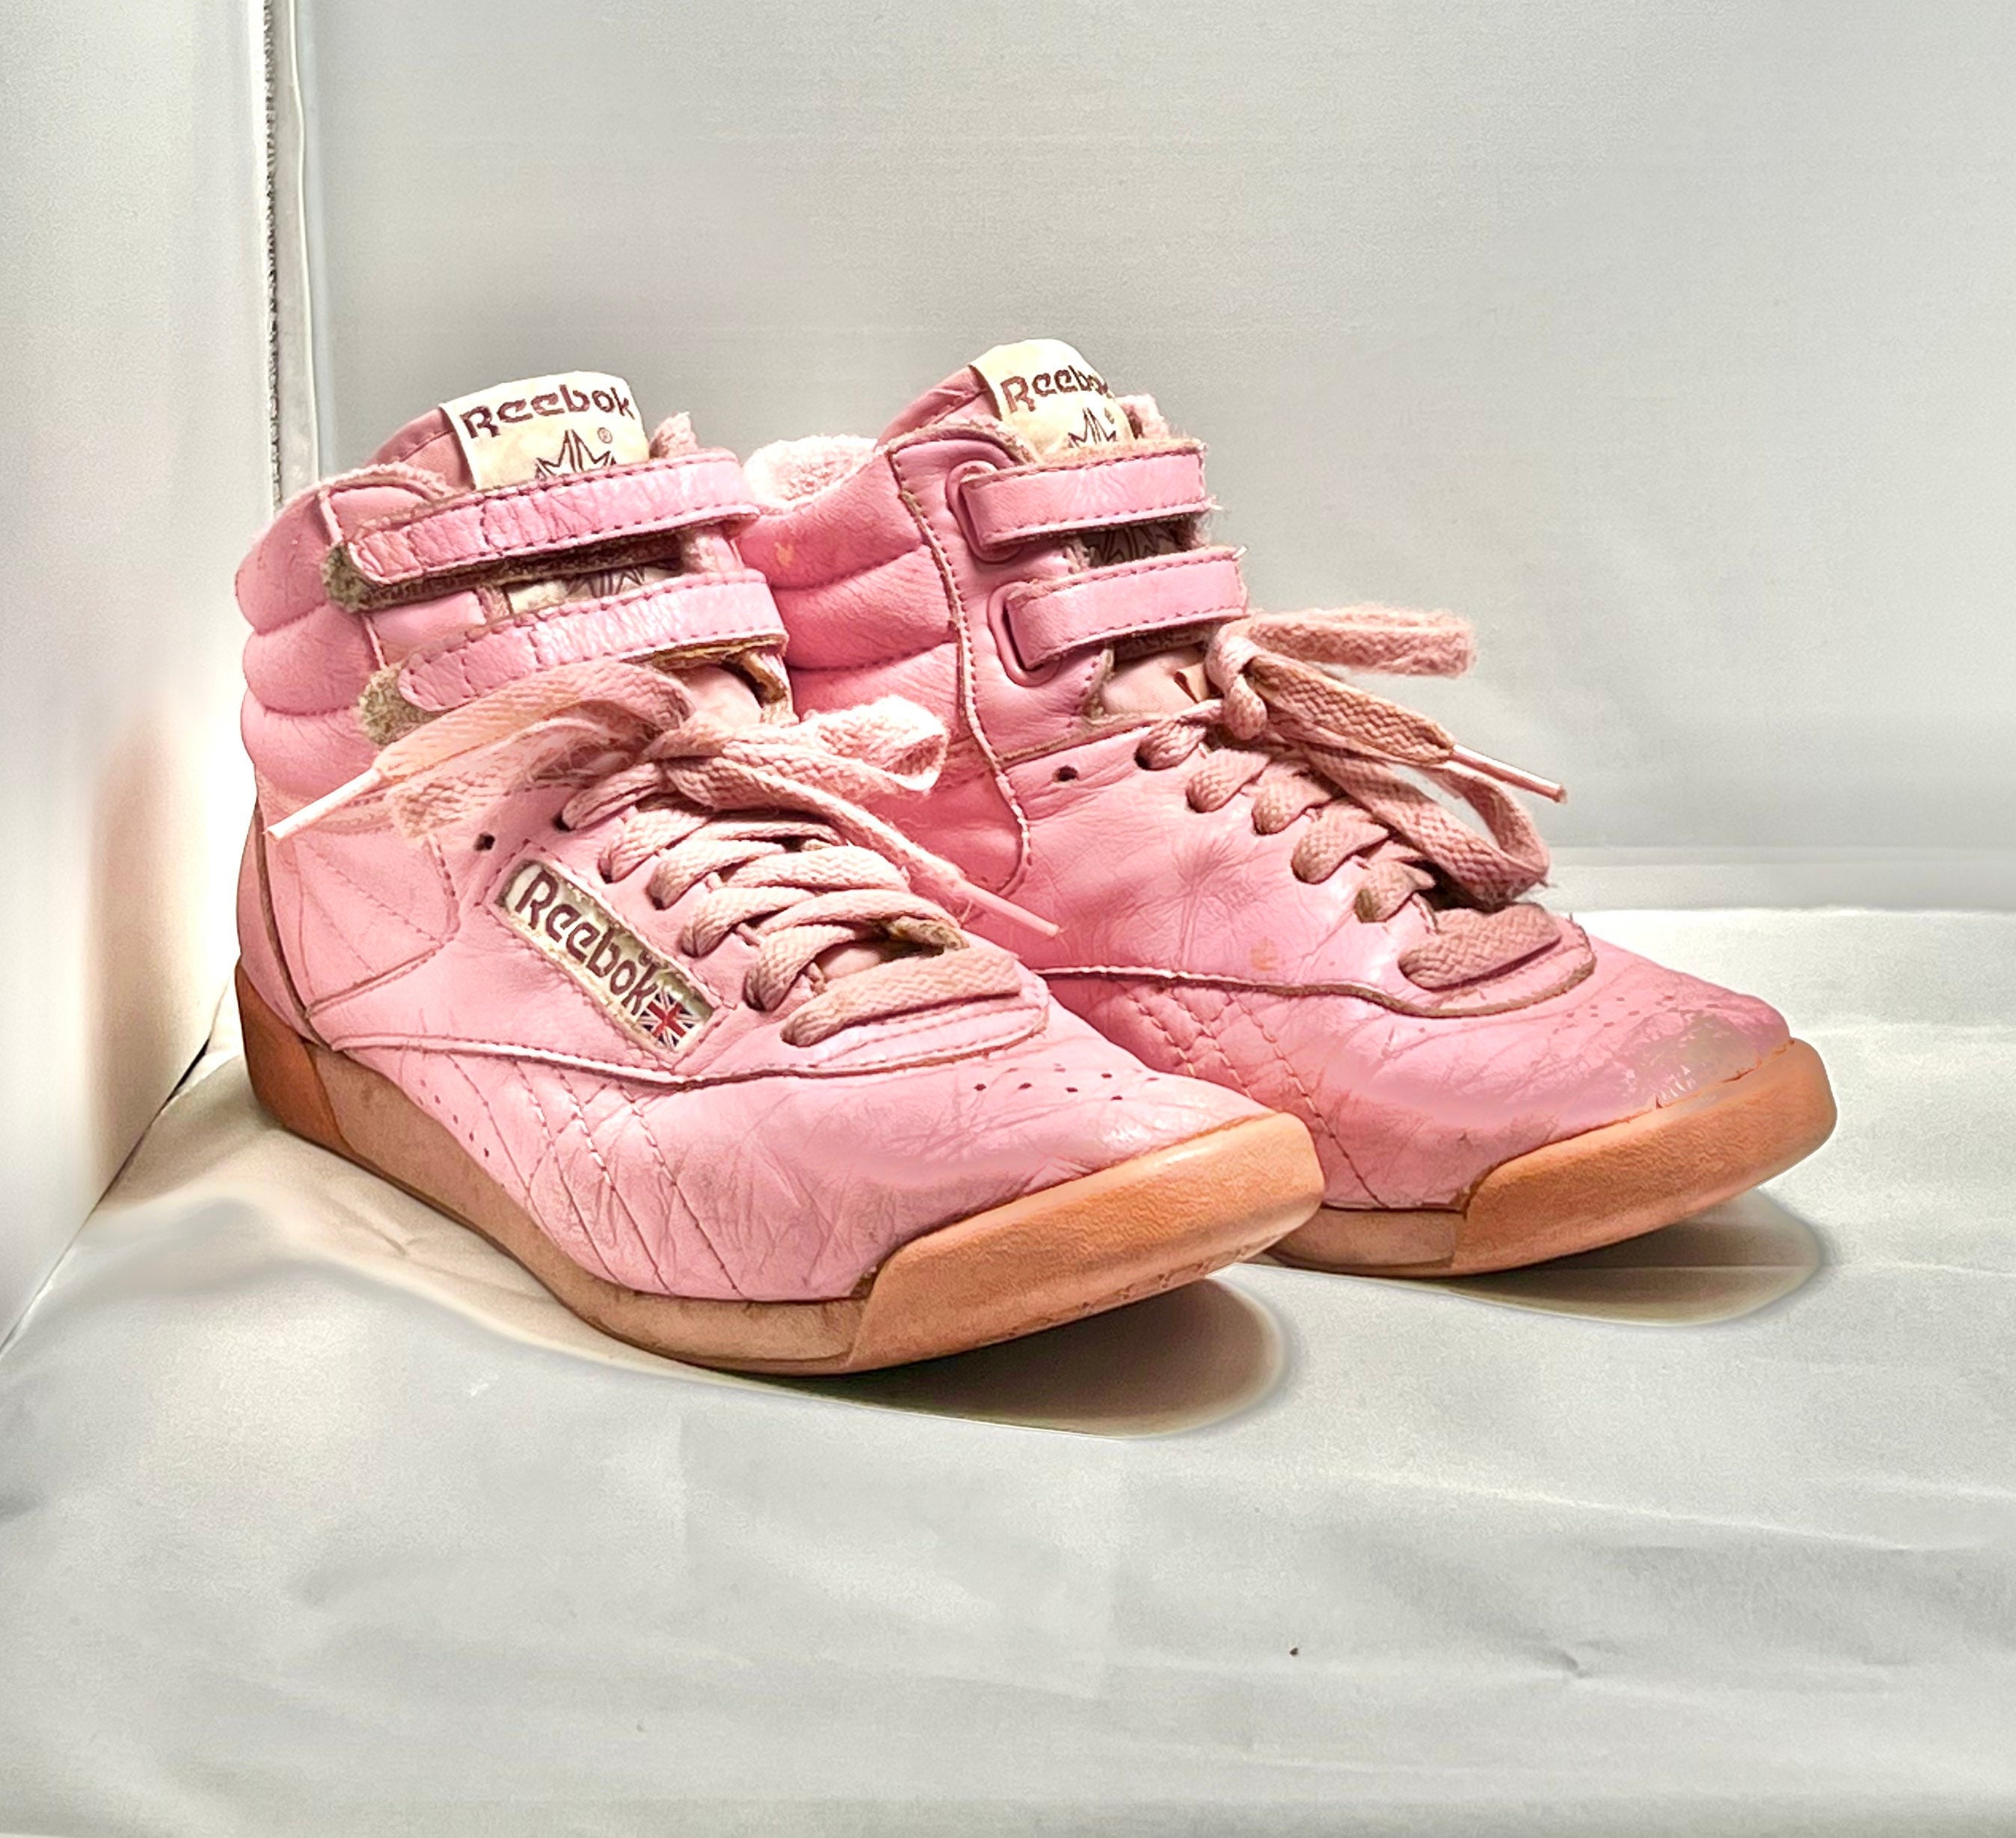 Vintage 1980s 90s Reebok High Tops Pink Classic US